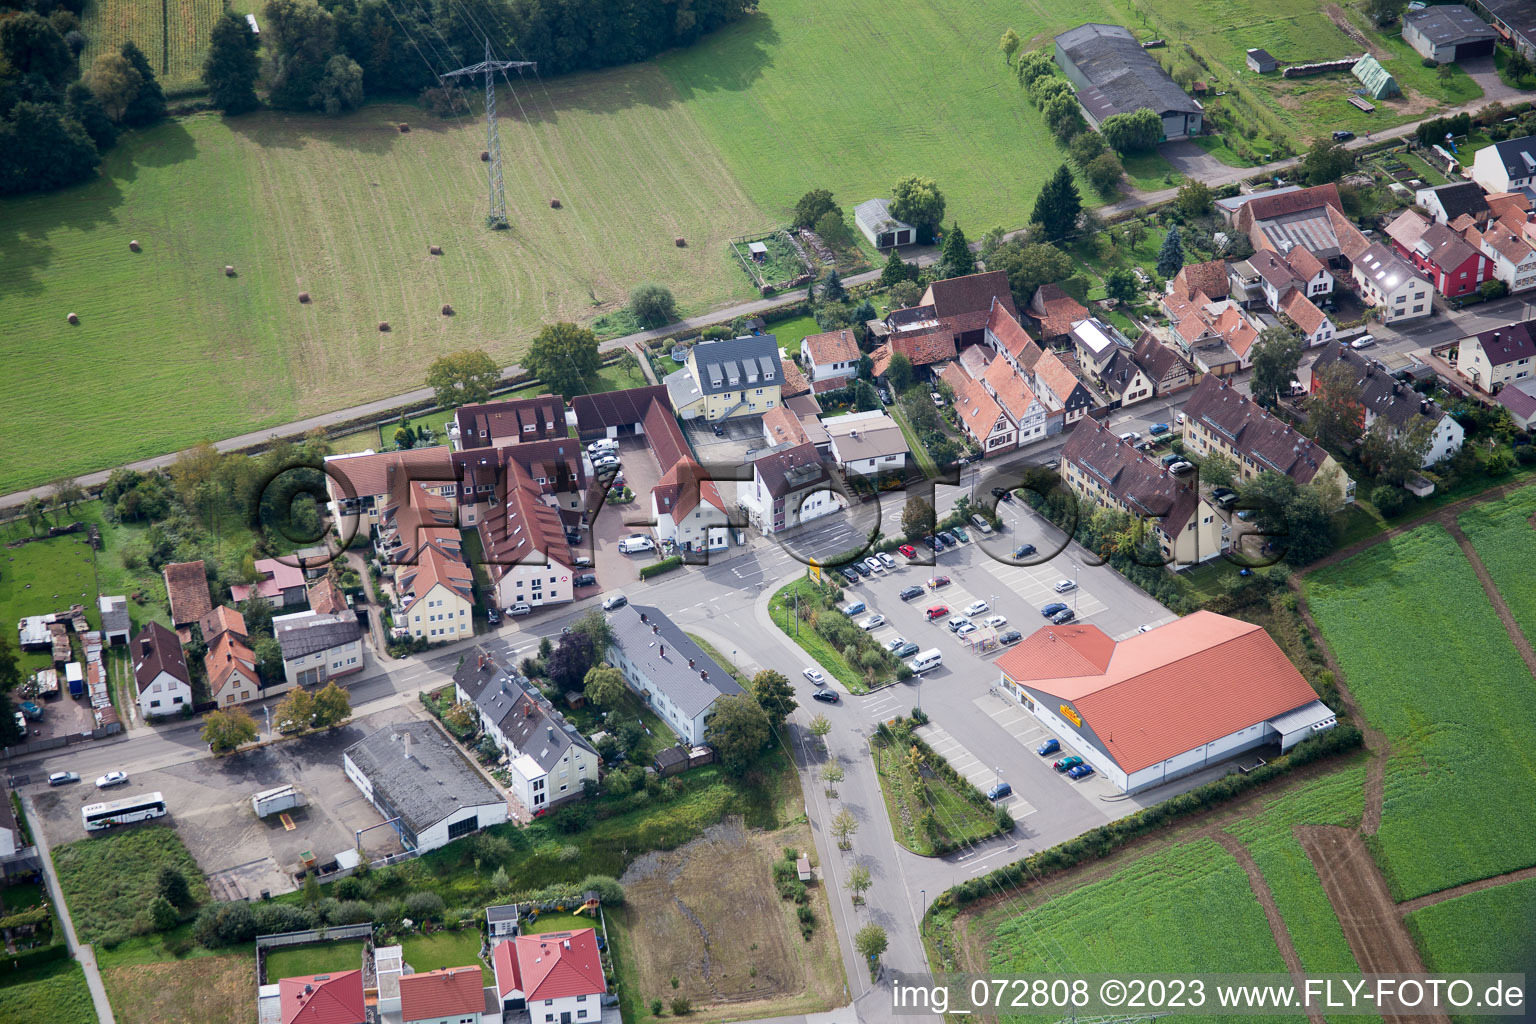 Saarstr in Kandel in the state Rhineland-Palatinate, Germany seen from above